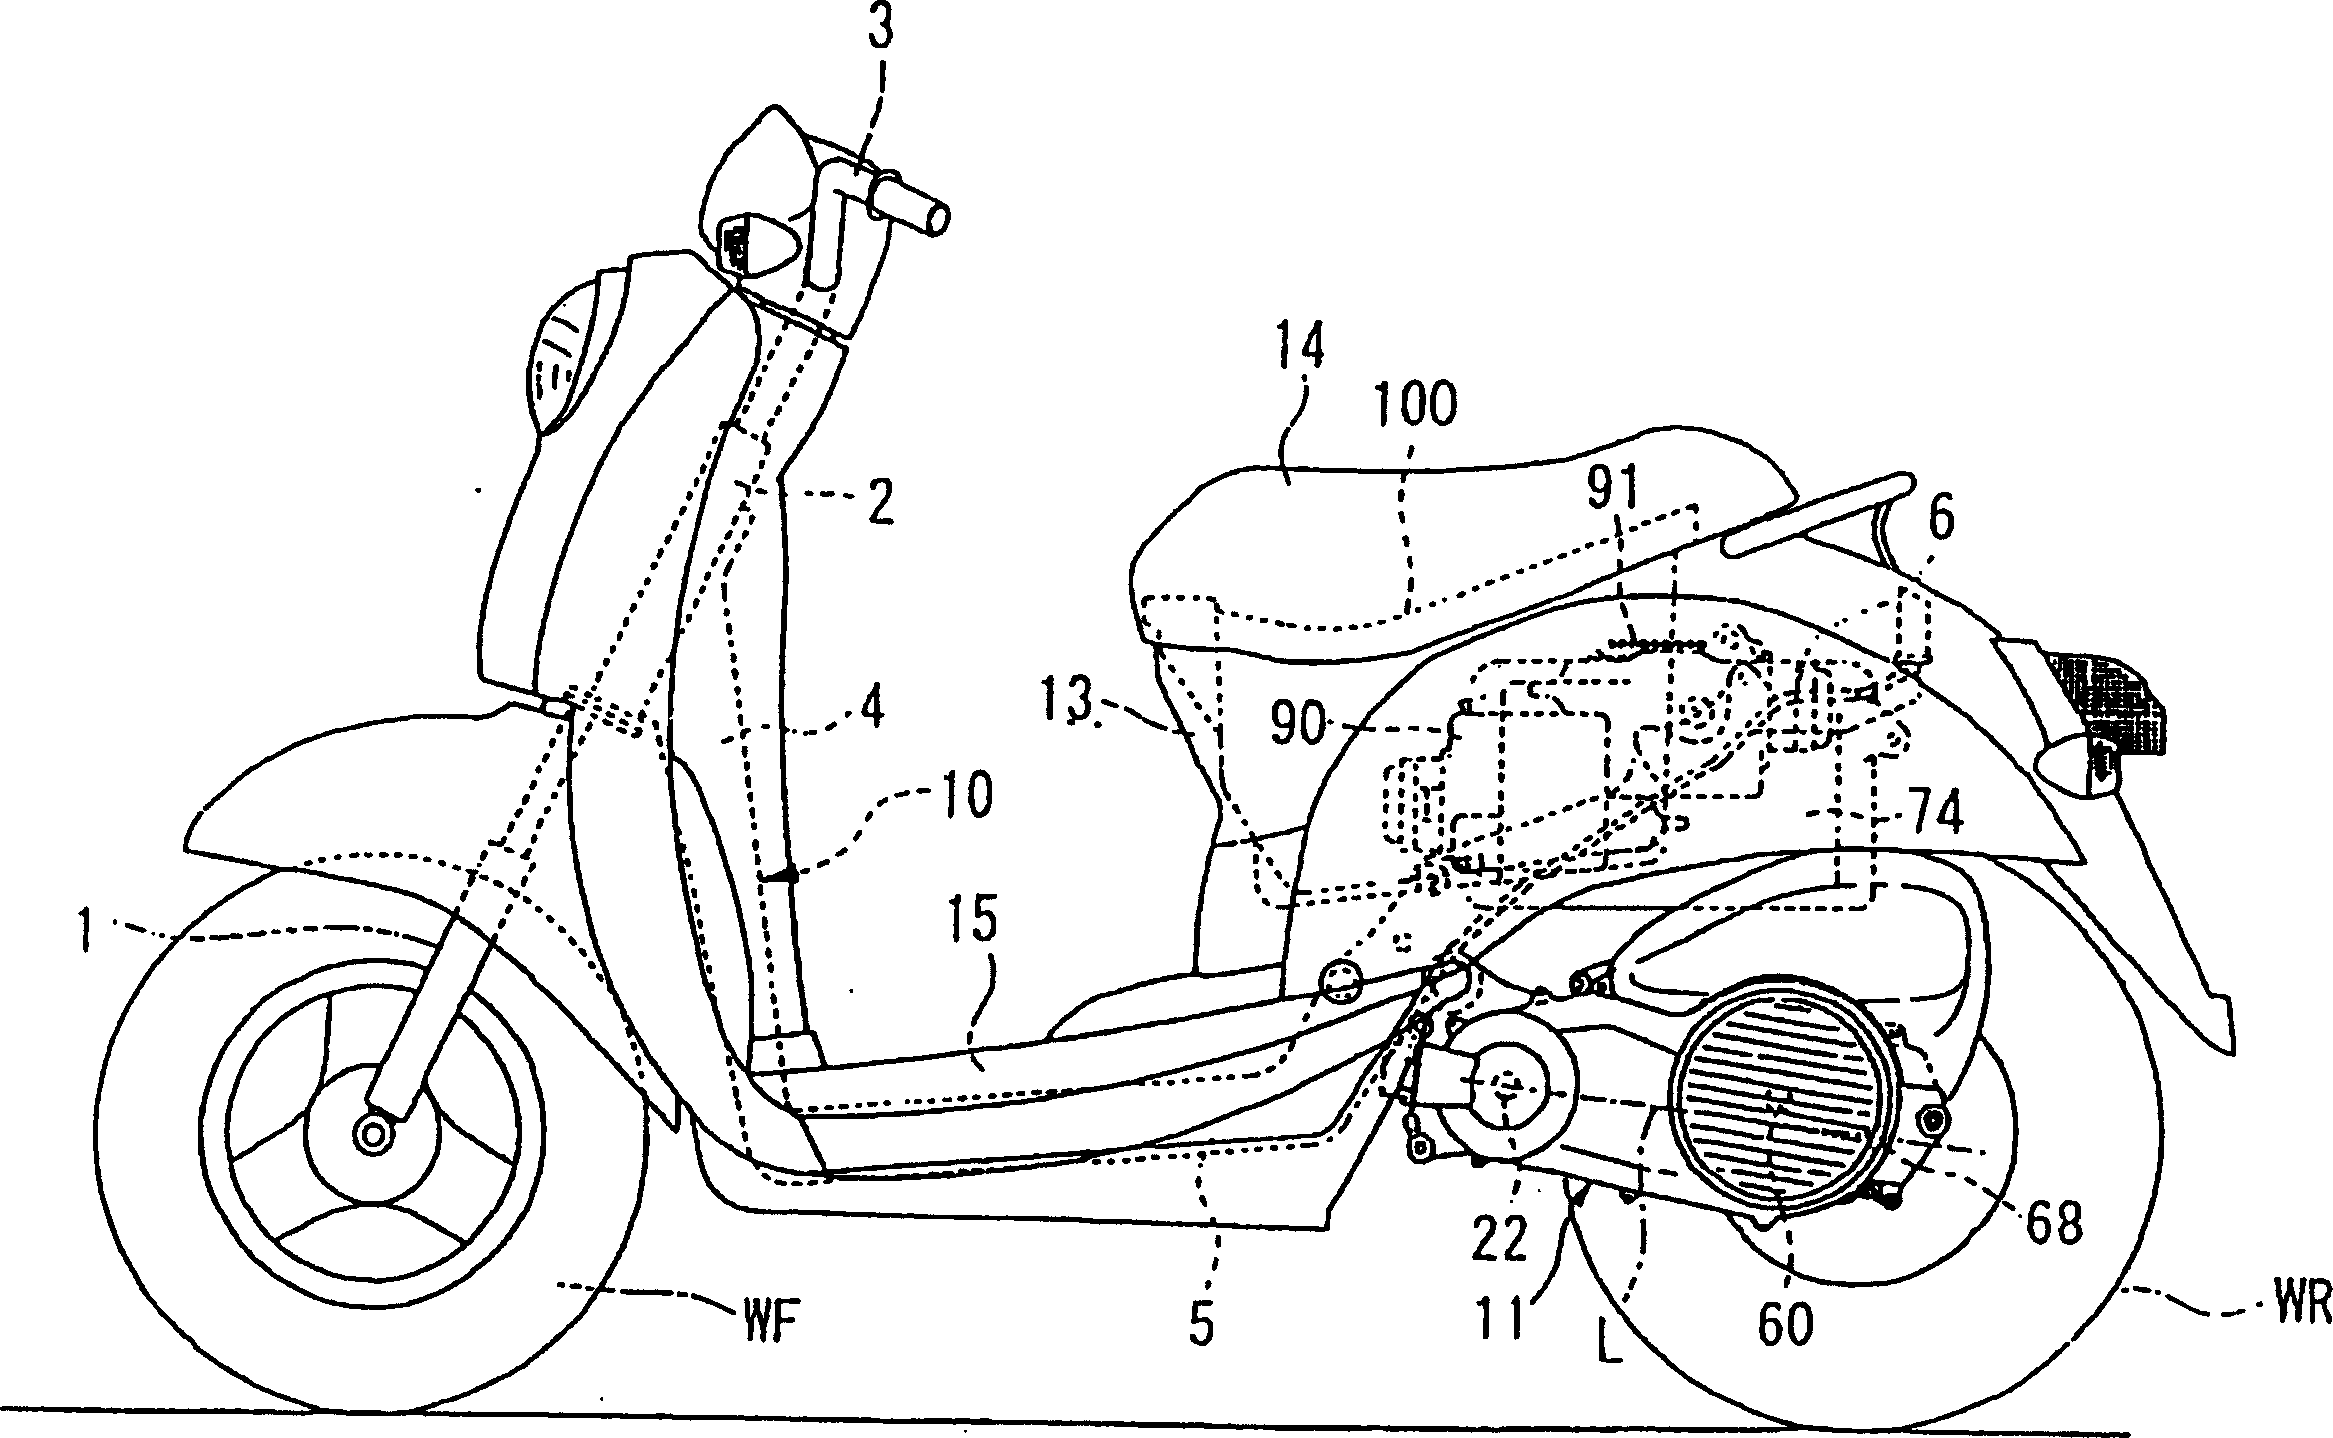 Power unit structure for hybrid vehicle